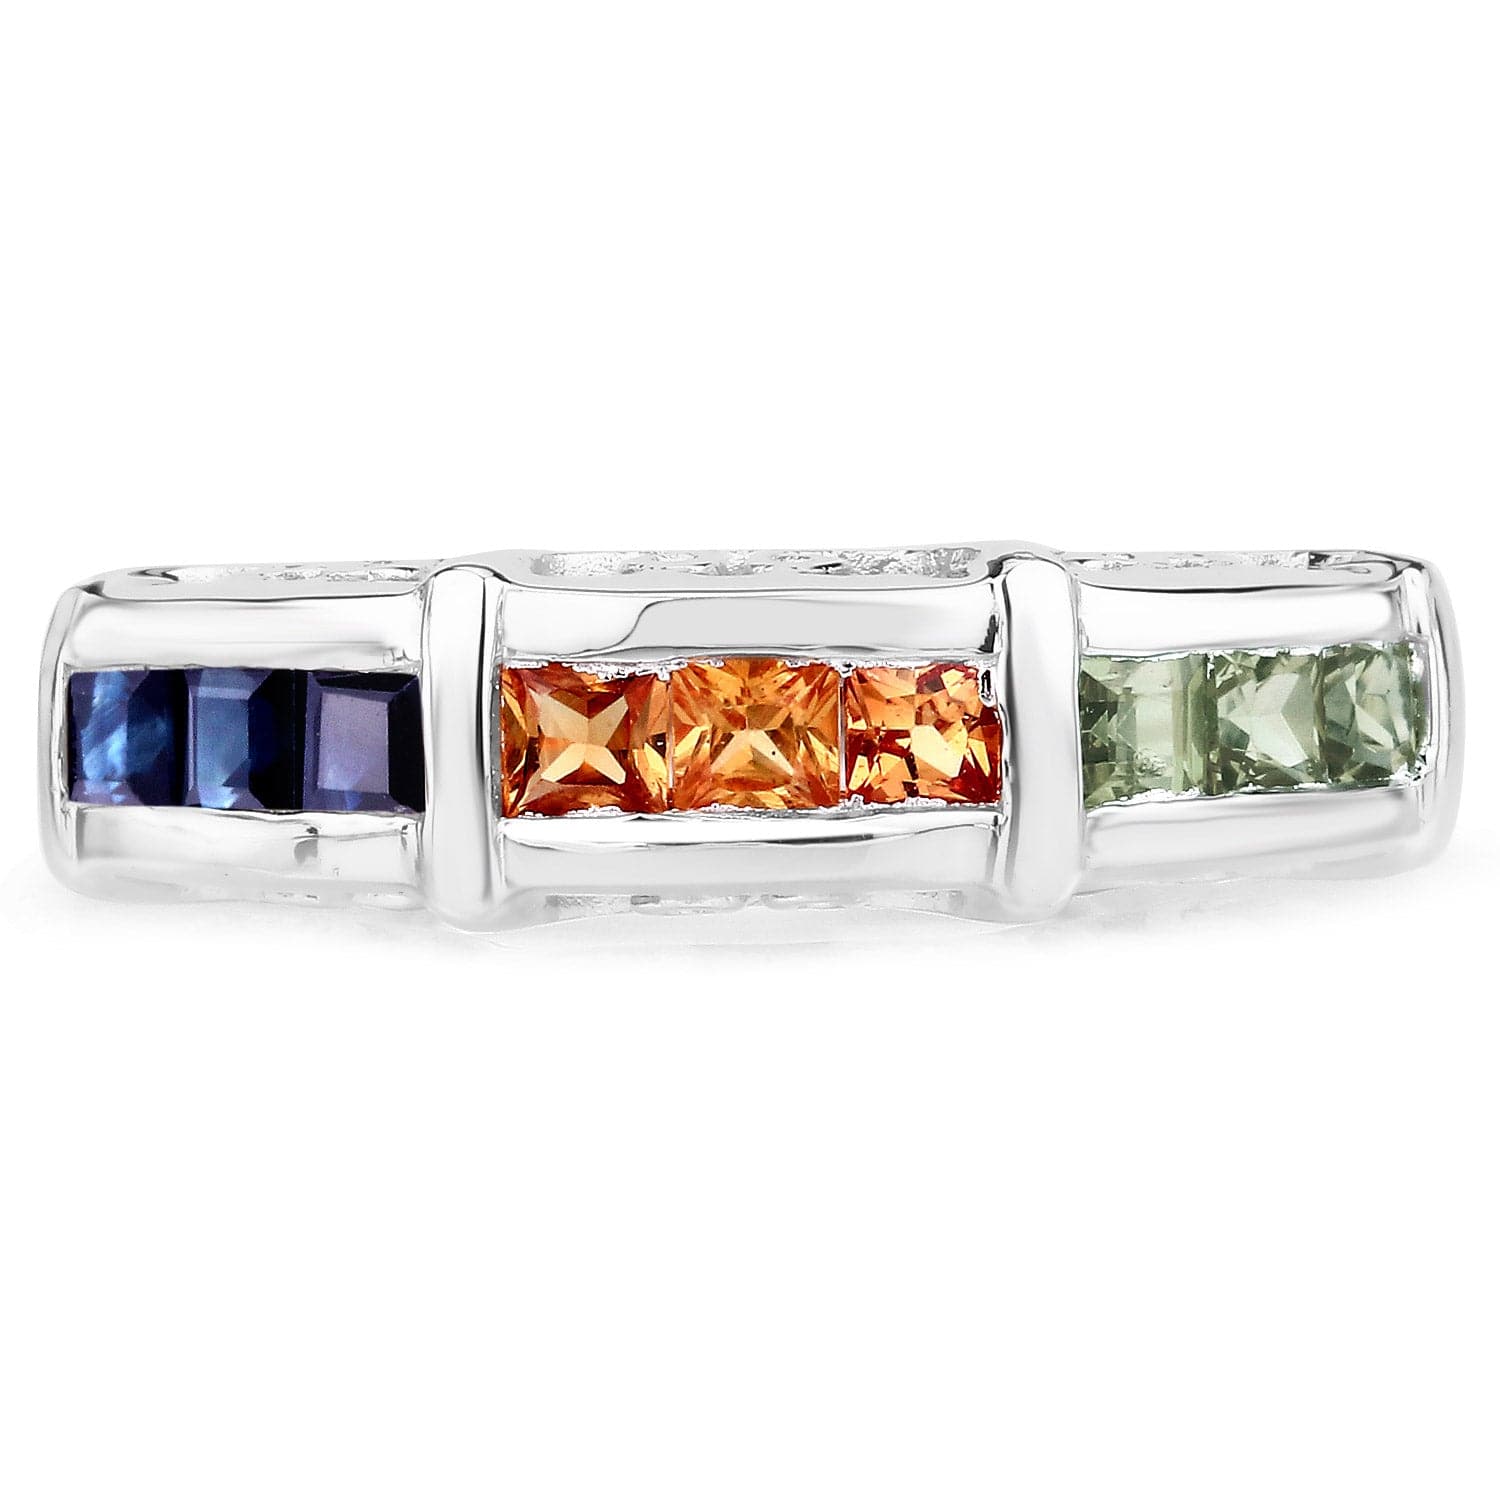 Natural Sapphire Sterling Silver Ring Channel Set Multi Colored Sapphires